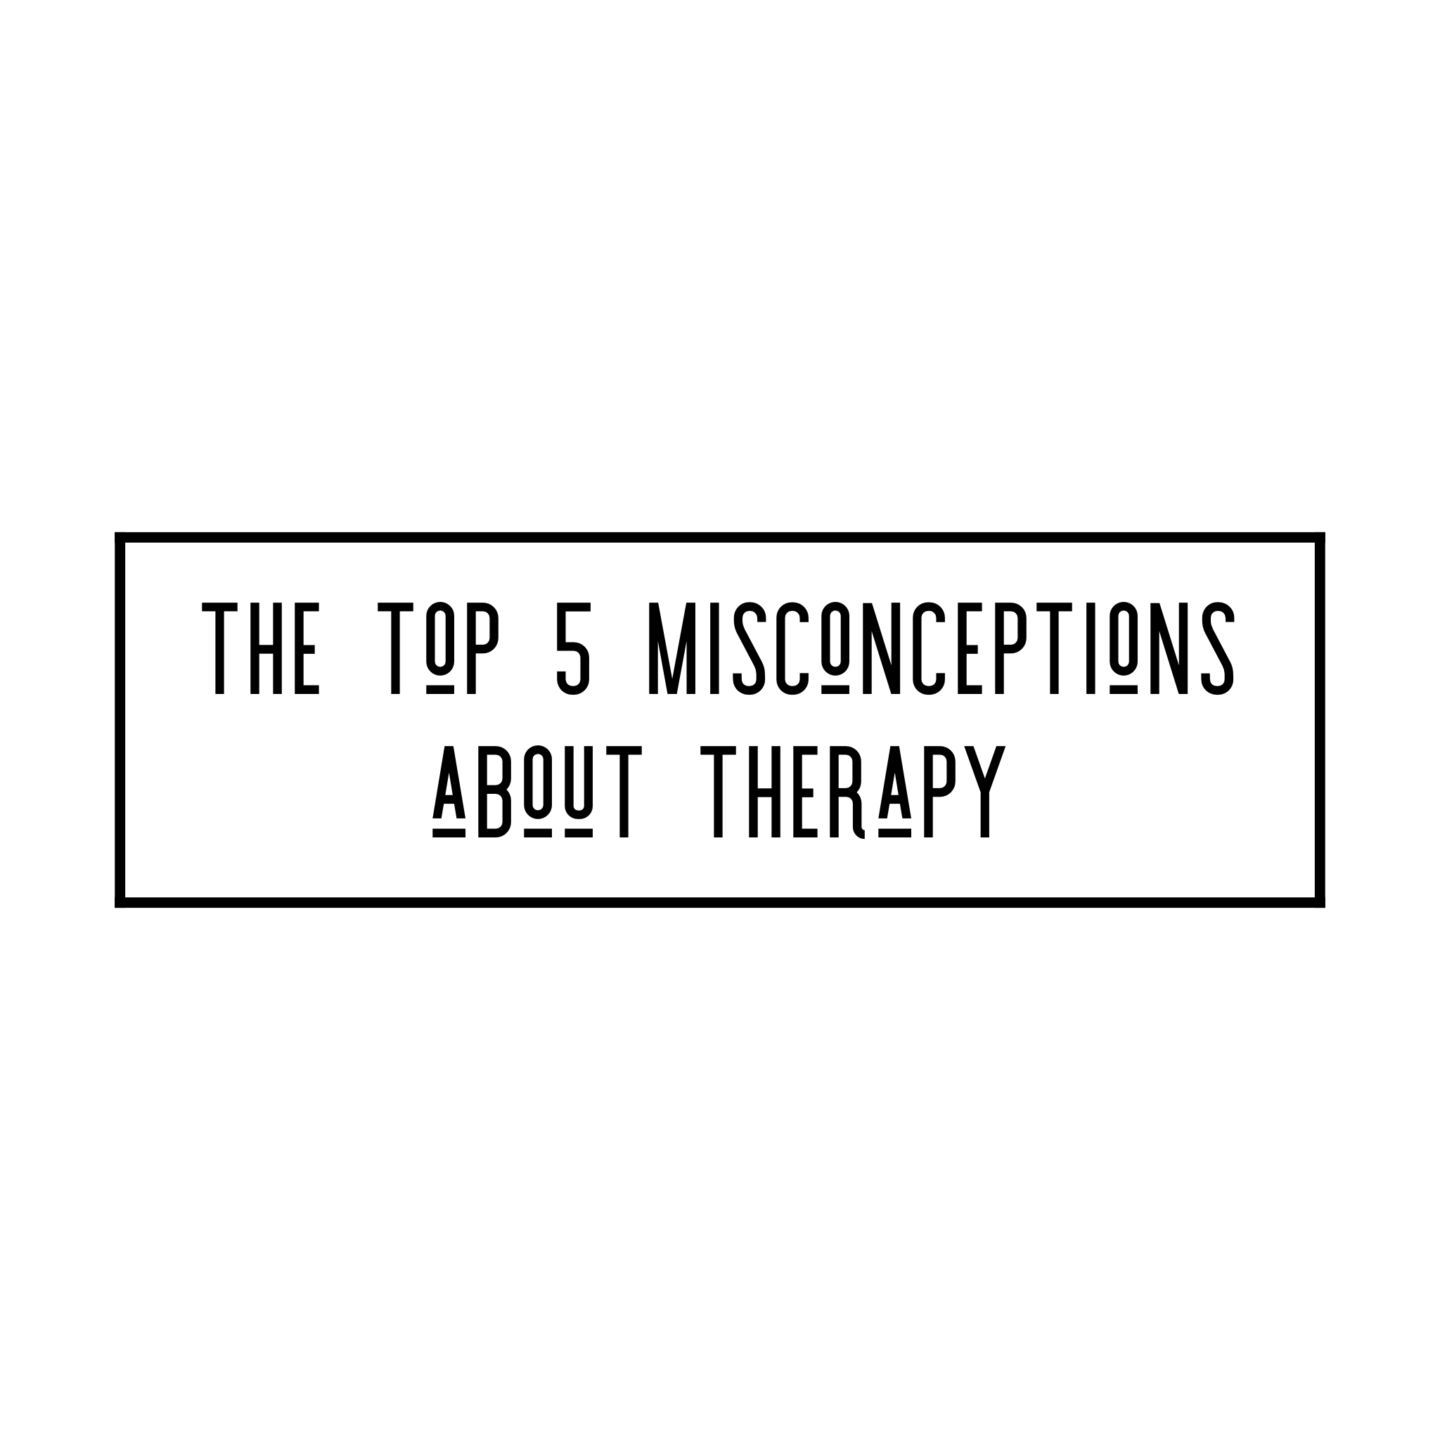 ﻿Top 5 Misconceptions about Therapy